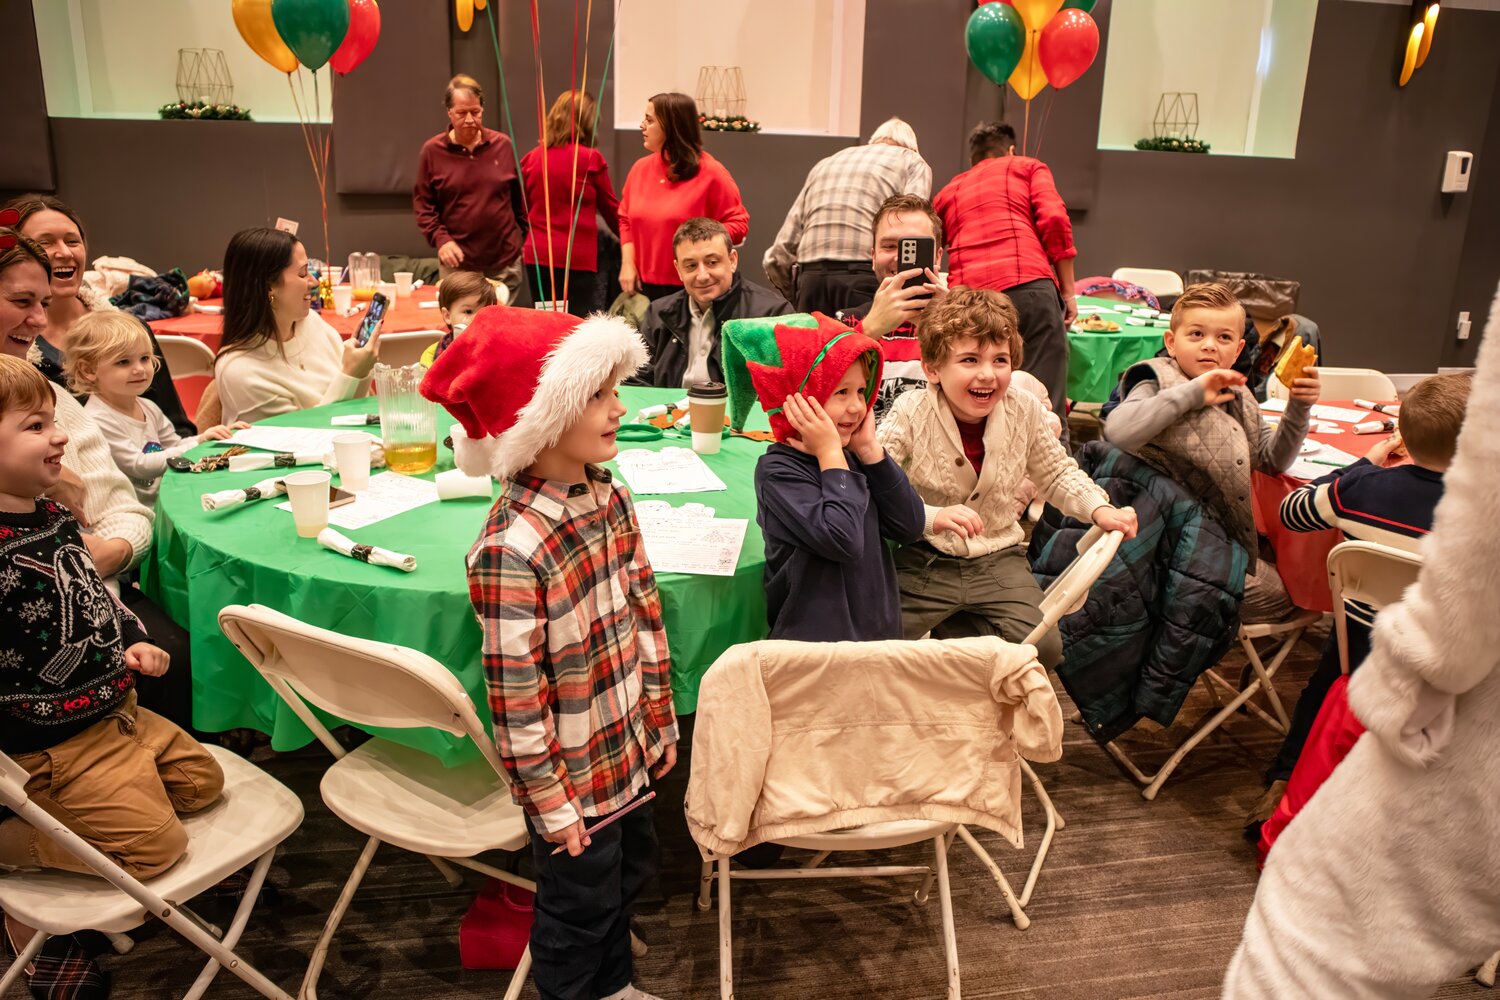 Kids lit up with delight when they finally saw Santa. These little neighbors are sure to be on the Nice List!